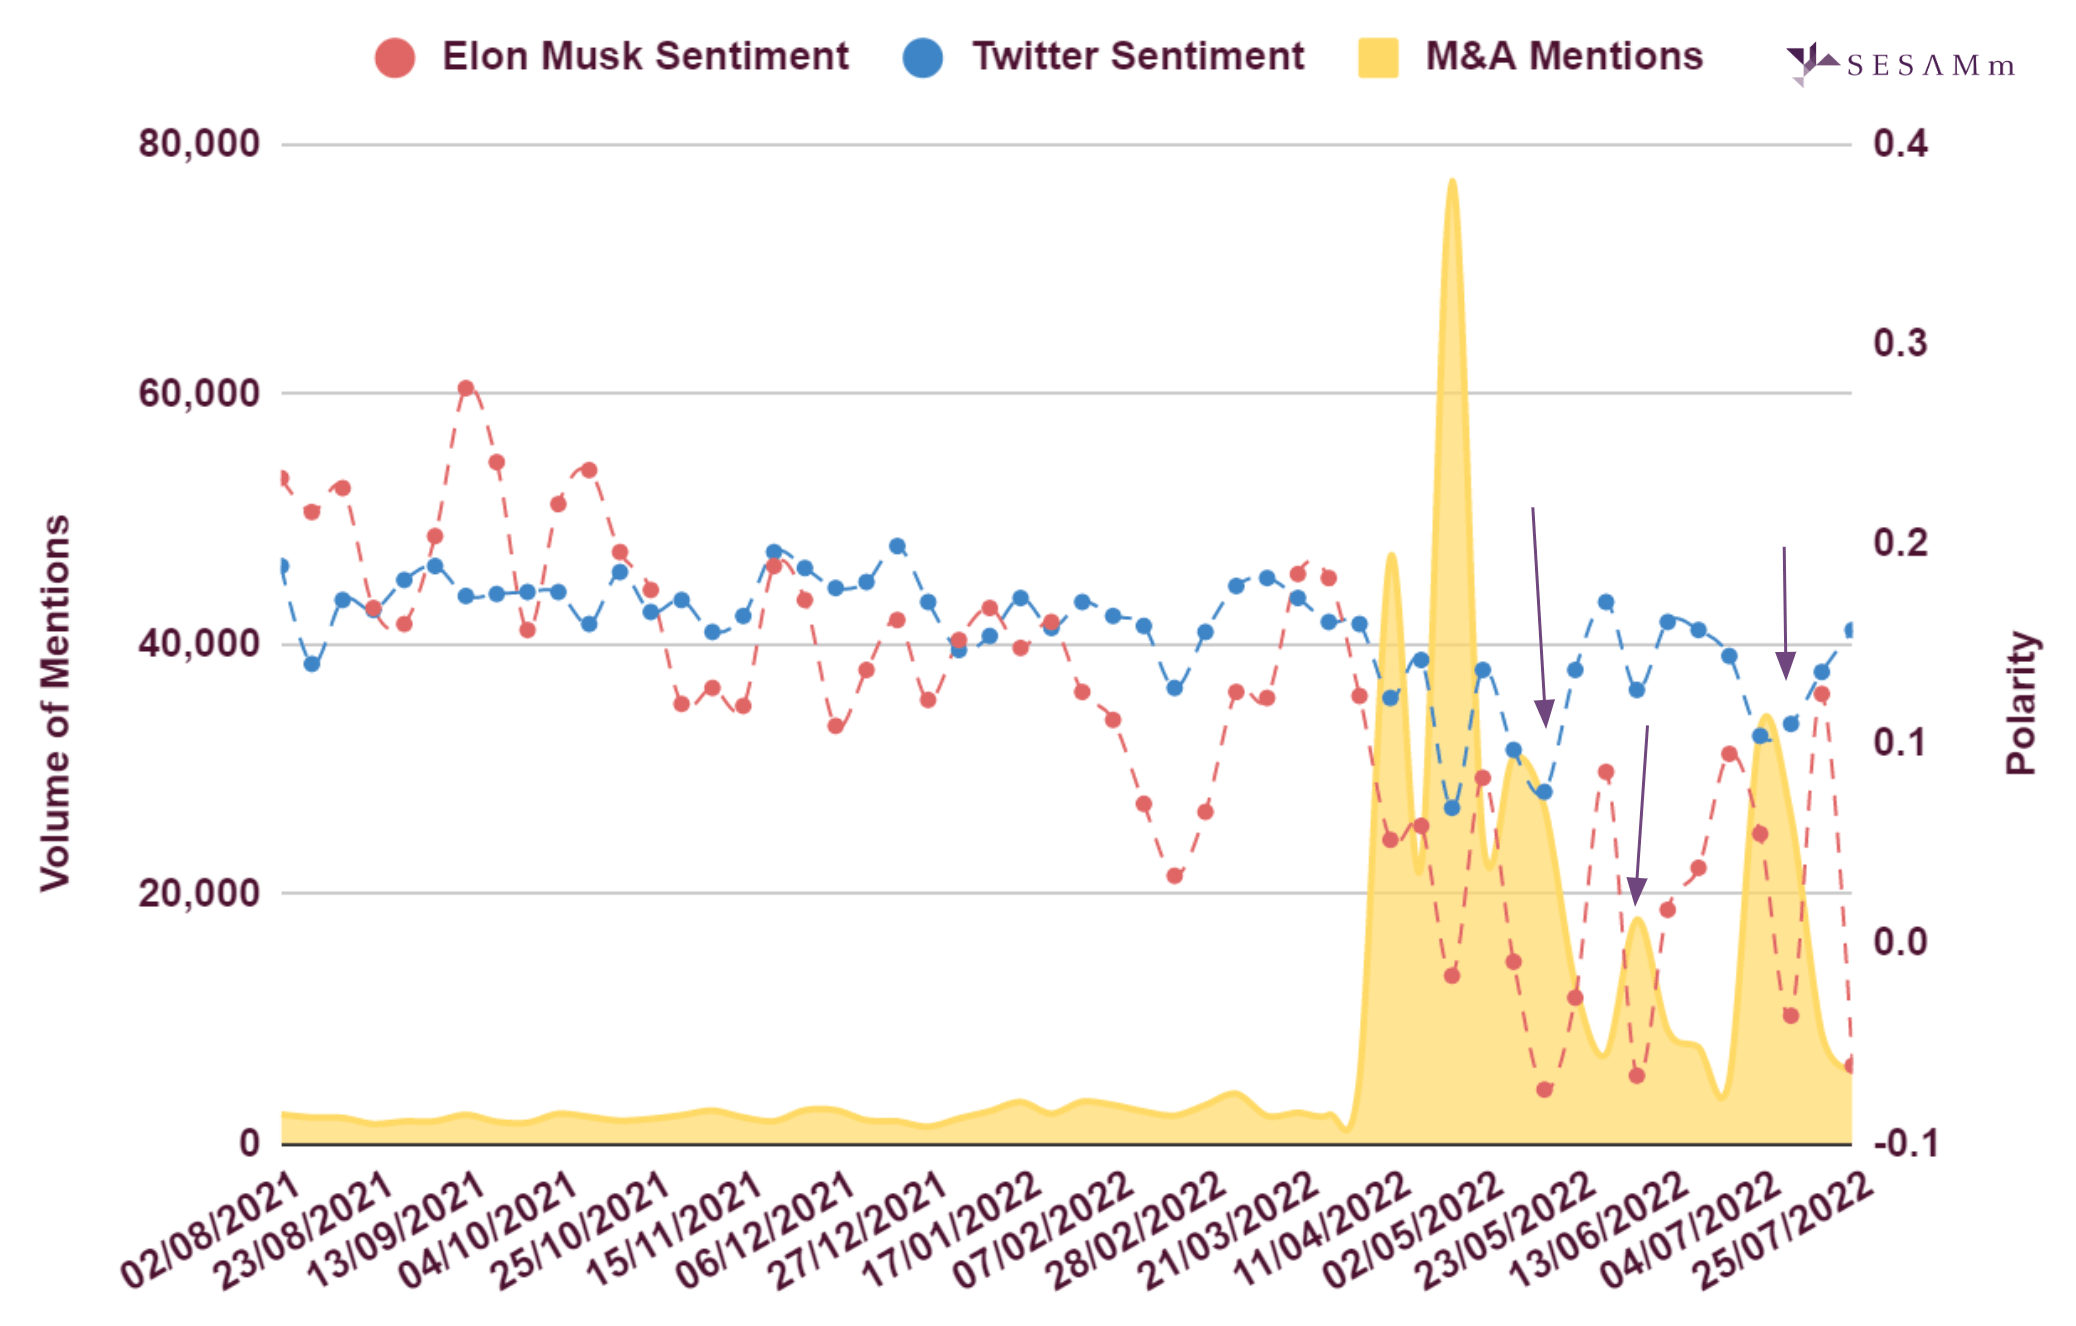 Mention volume and polarity chart for Elon Musk, Twitter, and M&A